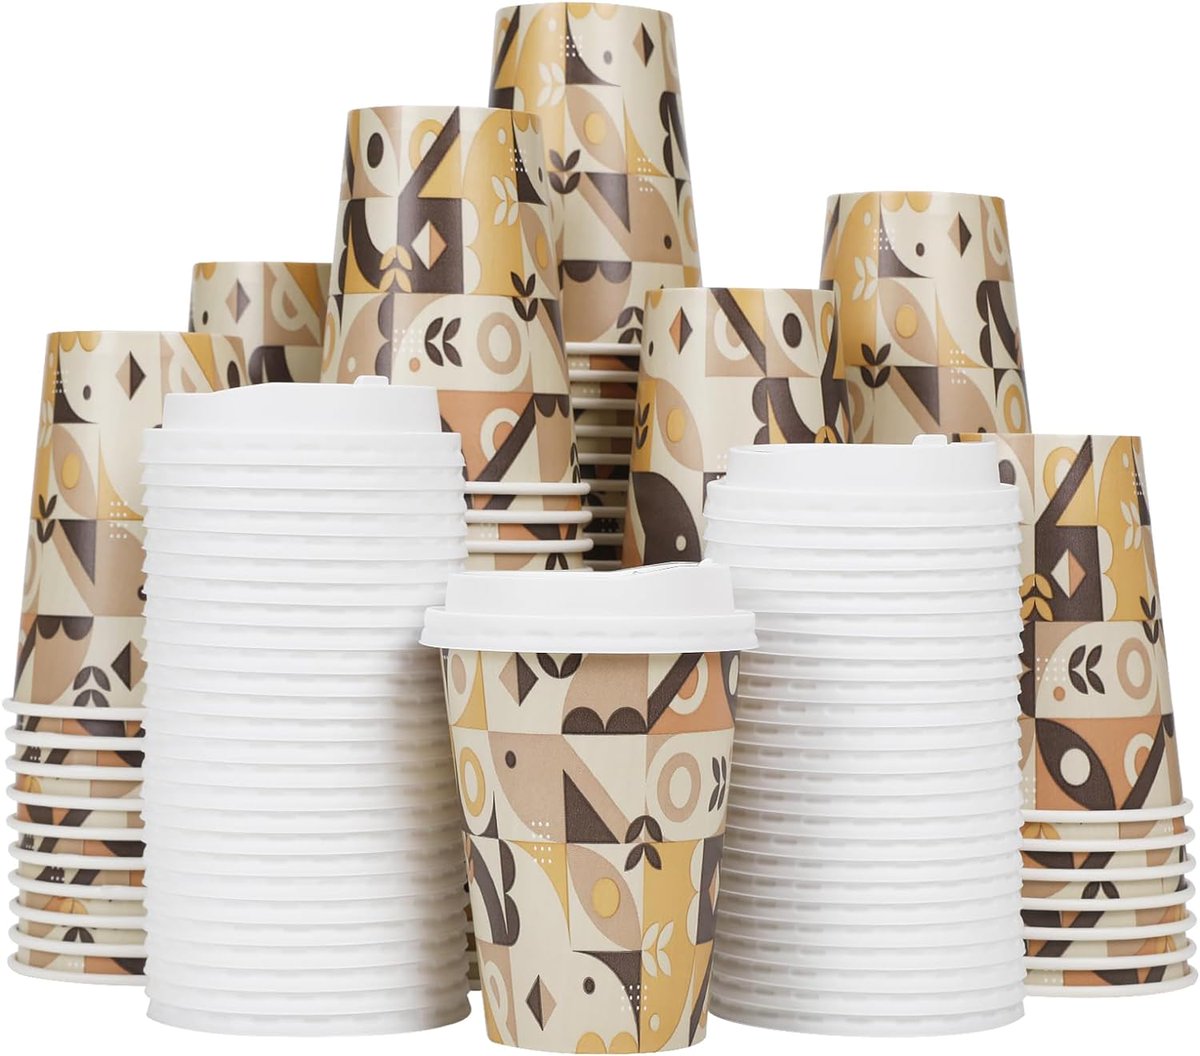 This 100 Pack 12 Oz Disposable Paper Coffee Cups With Lids is perfect for large gatherings and events. Purchase at partysupplyboxes.com
partysupplyboxes.com/p/party-suppli…
#coffeecups #disposable #lids #paper #hotdrinks #100pack #12ounces #largegatherings #partysupplies #shopourwebsite